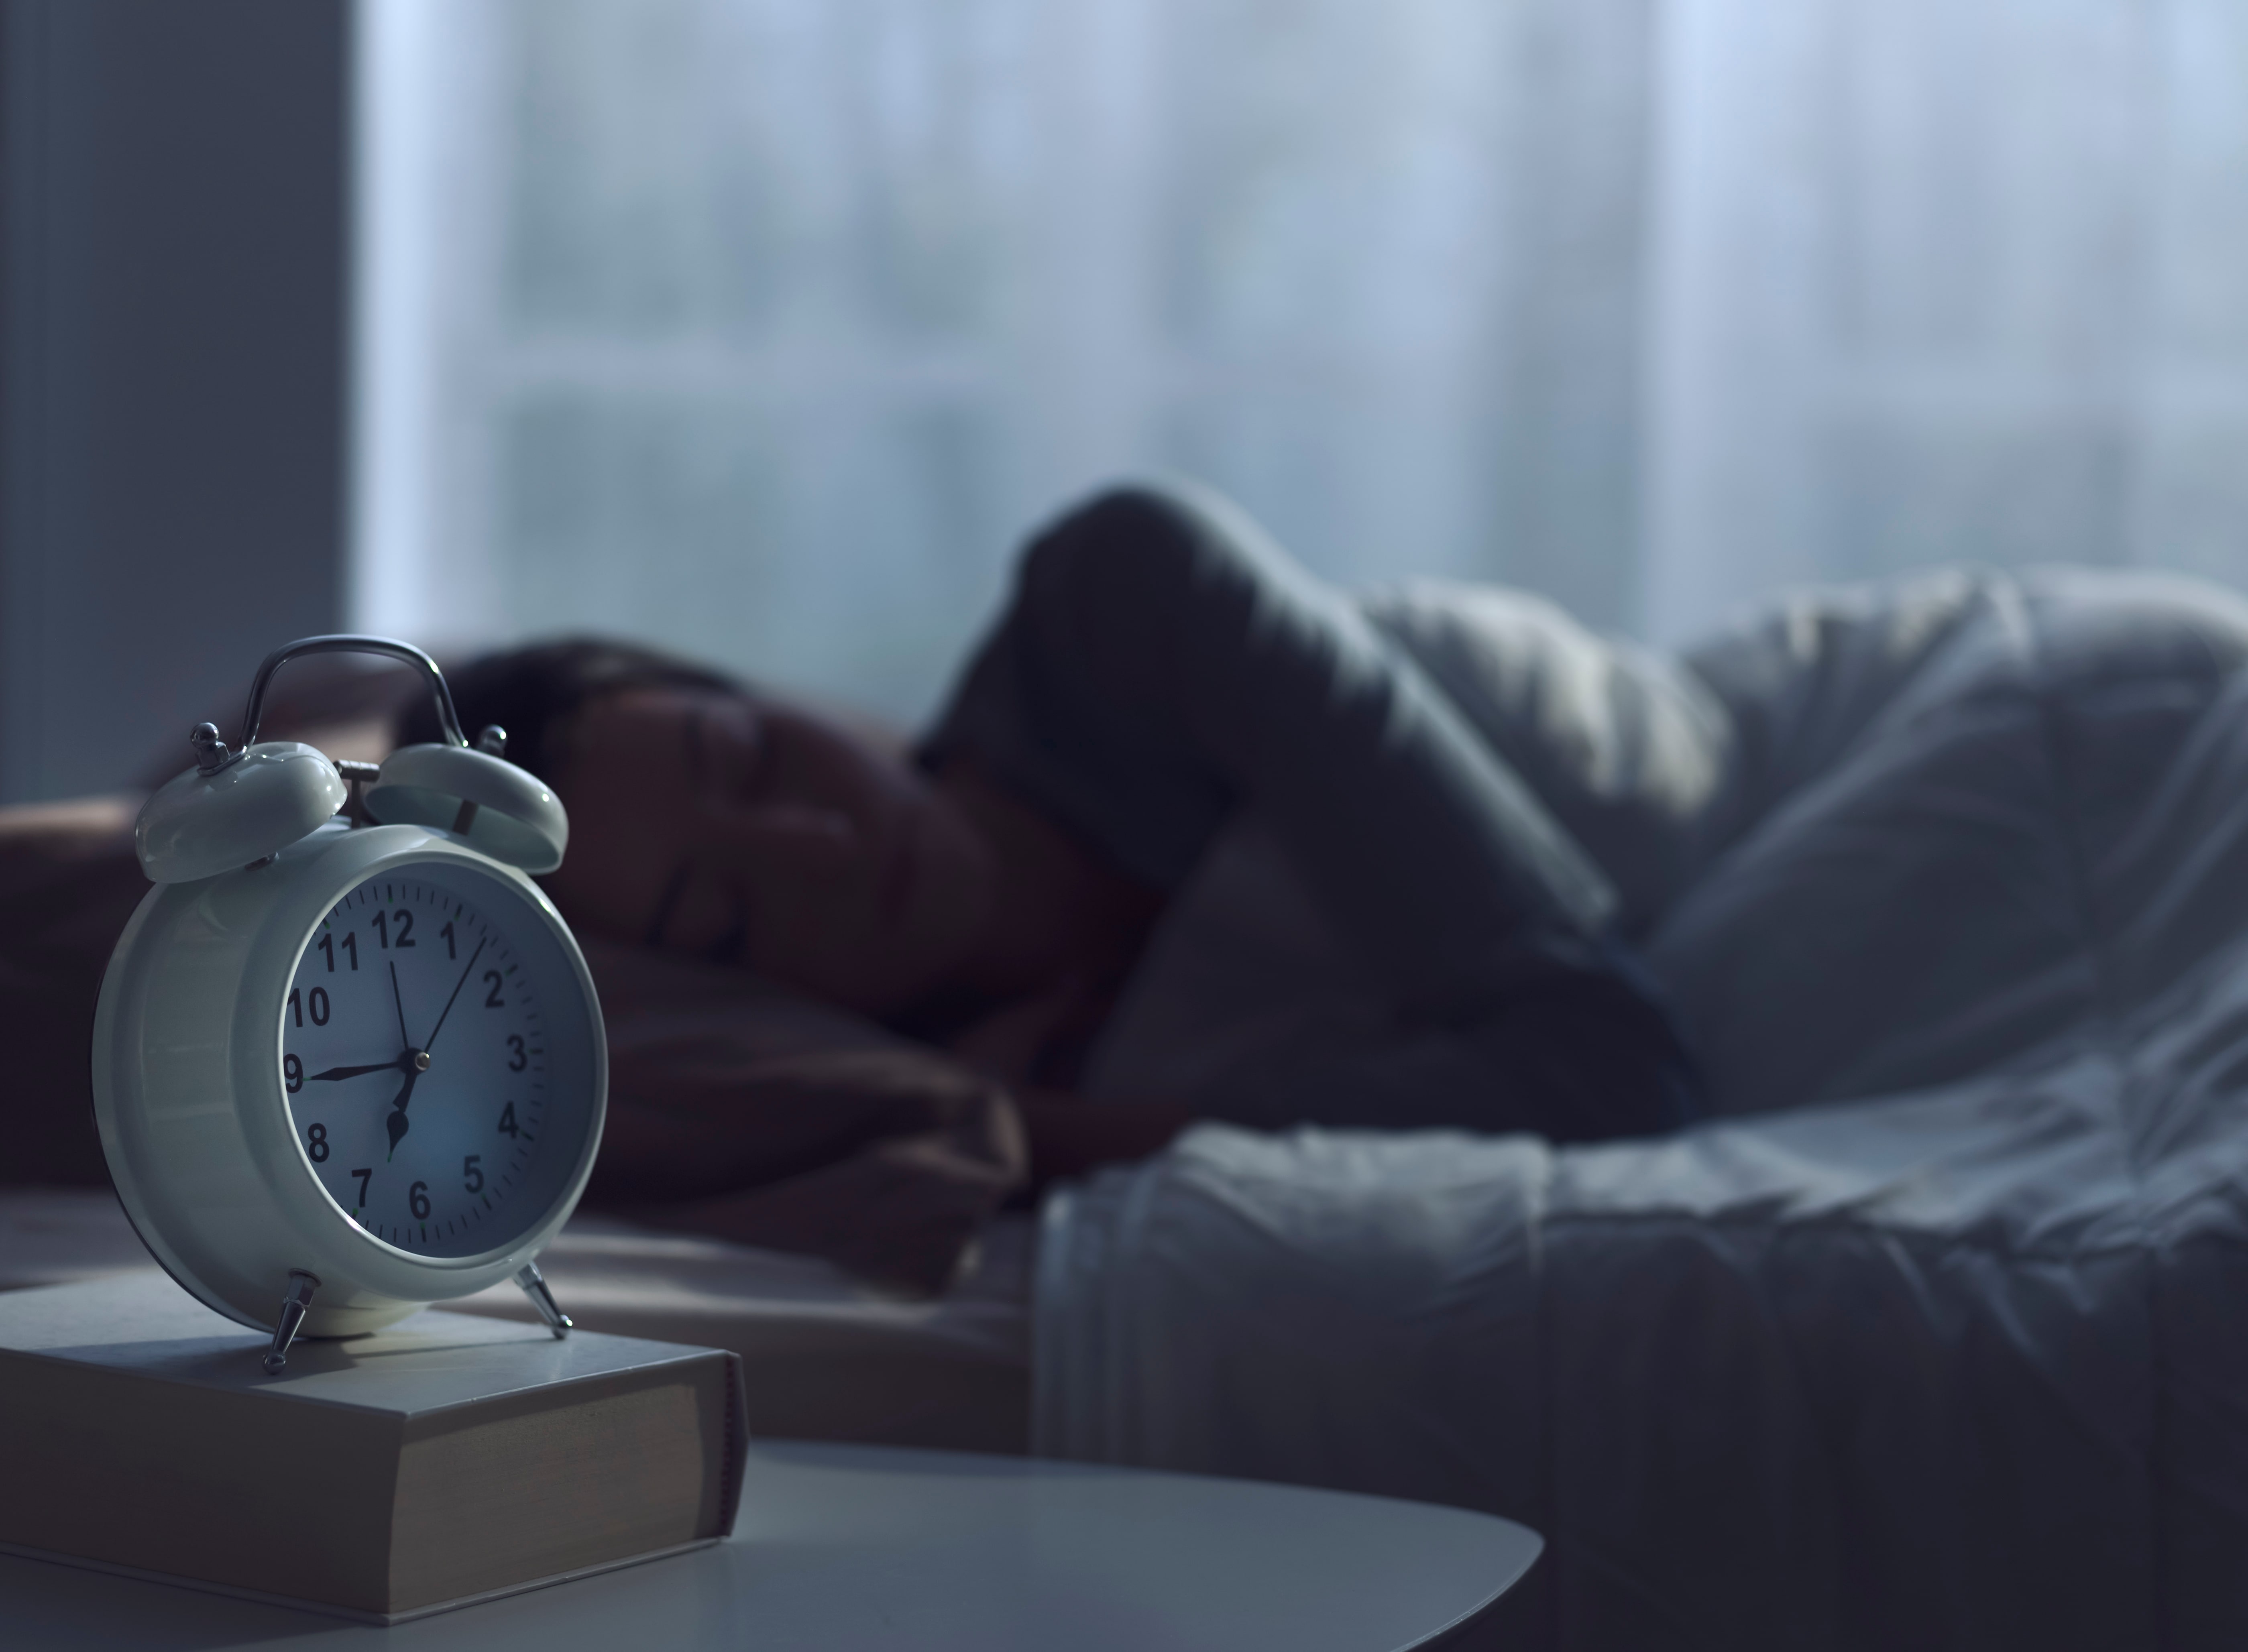 A lady asleep in bed. A retro alarm clock displaying the time 6:45 am is in the foreground of the image